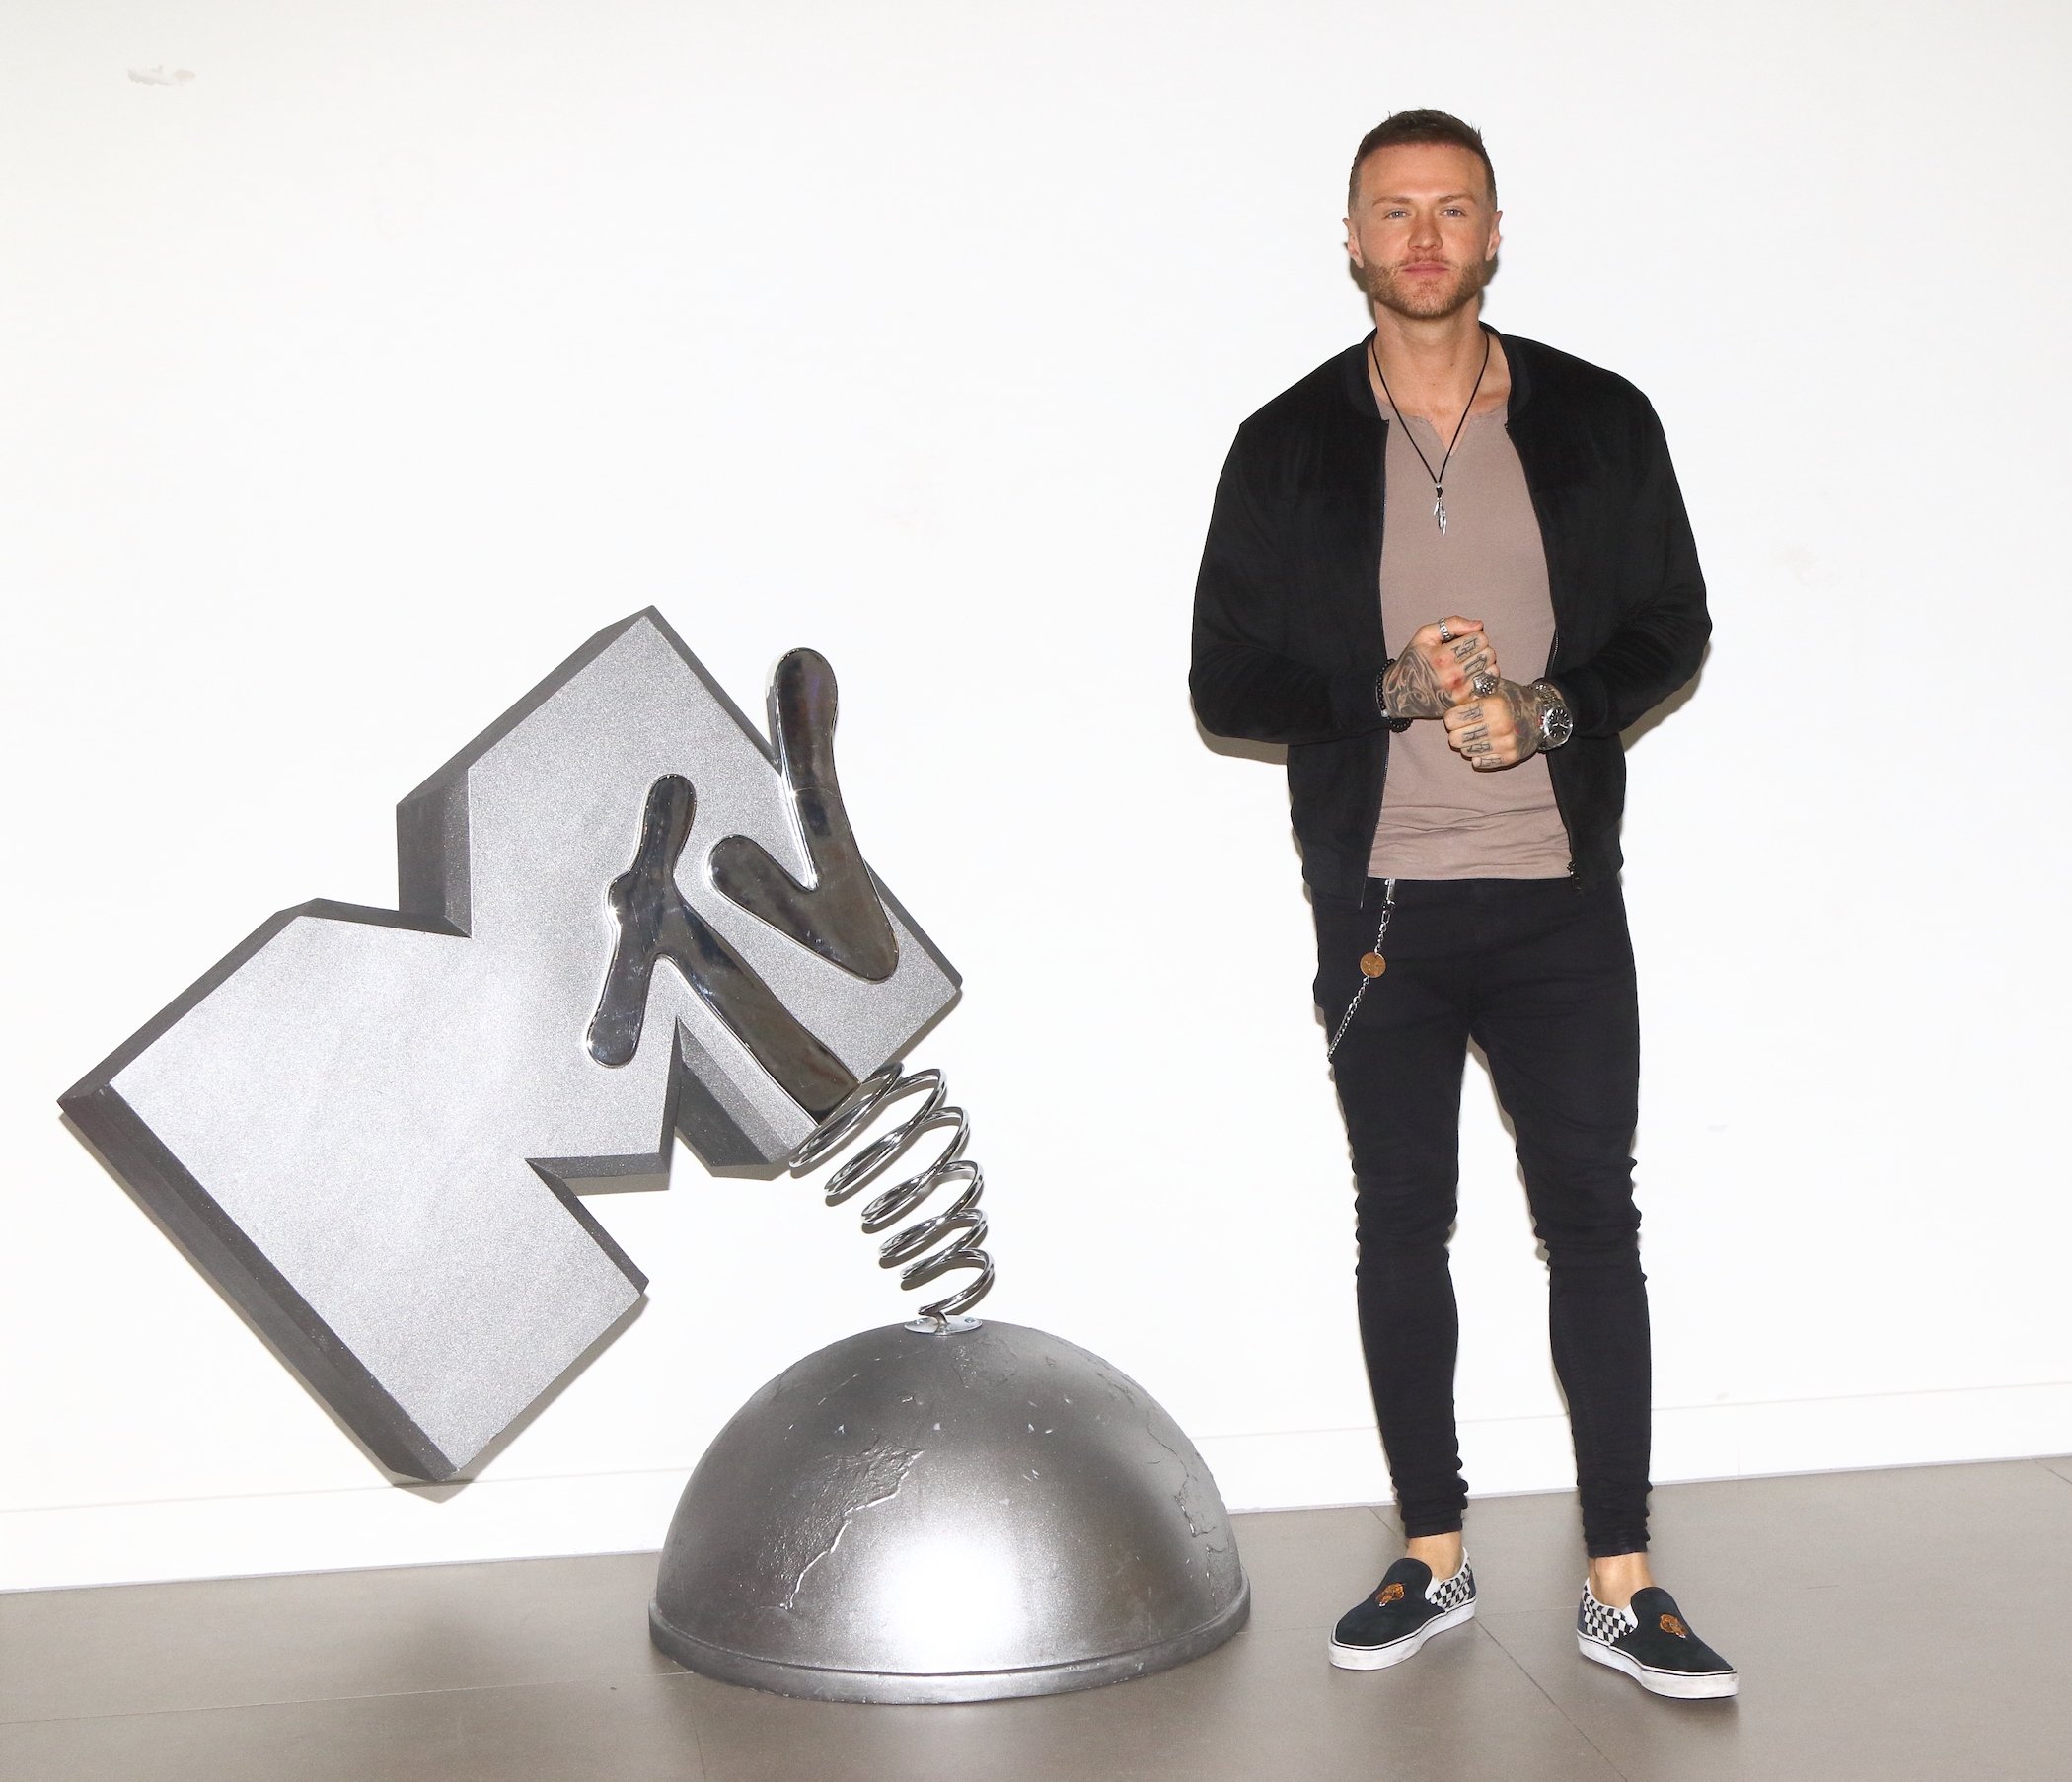 Kyle Christie from MTV’s 'The Challenge' Season 37 standing next to an MTV statue. 'The Challenge' Season 37 elimination spoilers note Kyle beats Josh Martinez in an elimination.